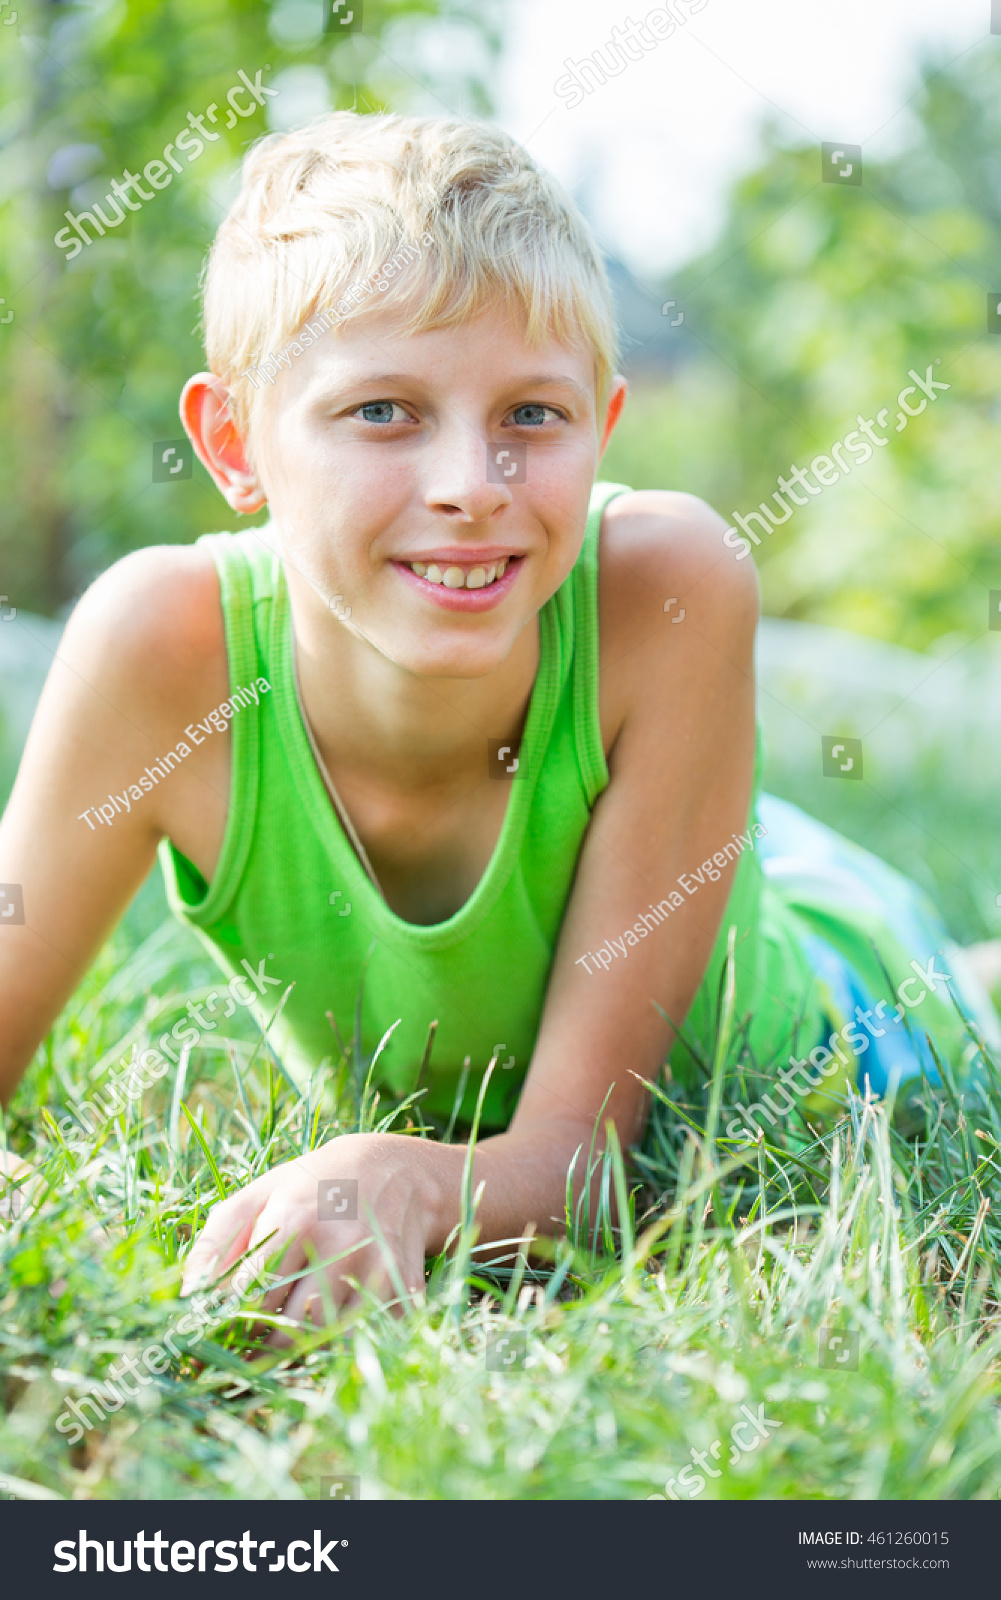 Portrait of a boy fourteen years of age in the grass #461260015